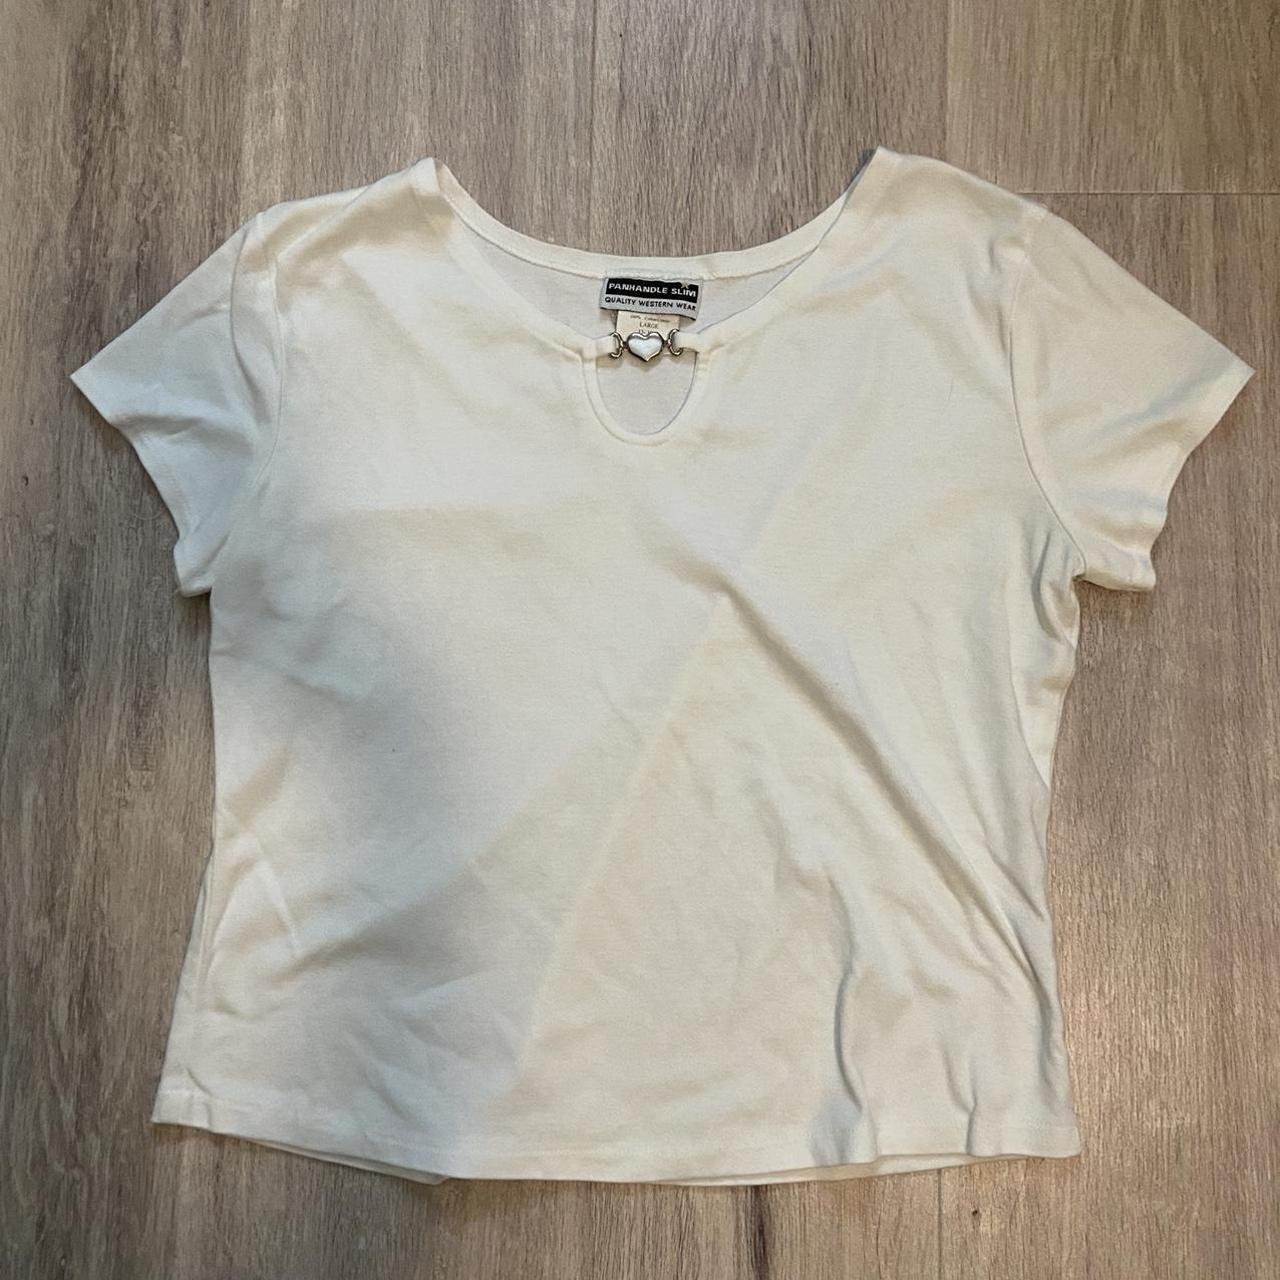 Panhandle Women's Silver and White Shirt | Depop